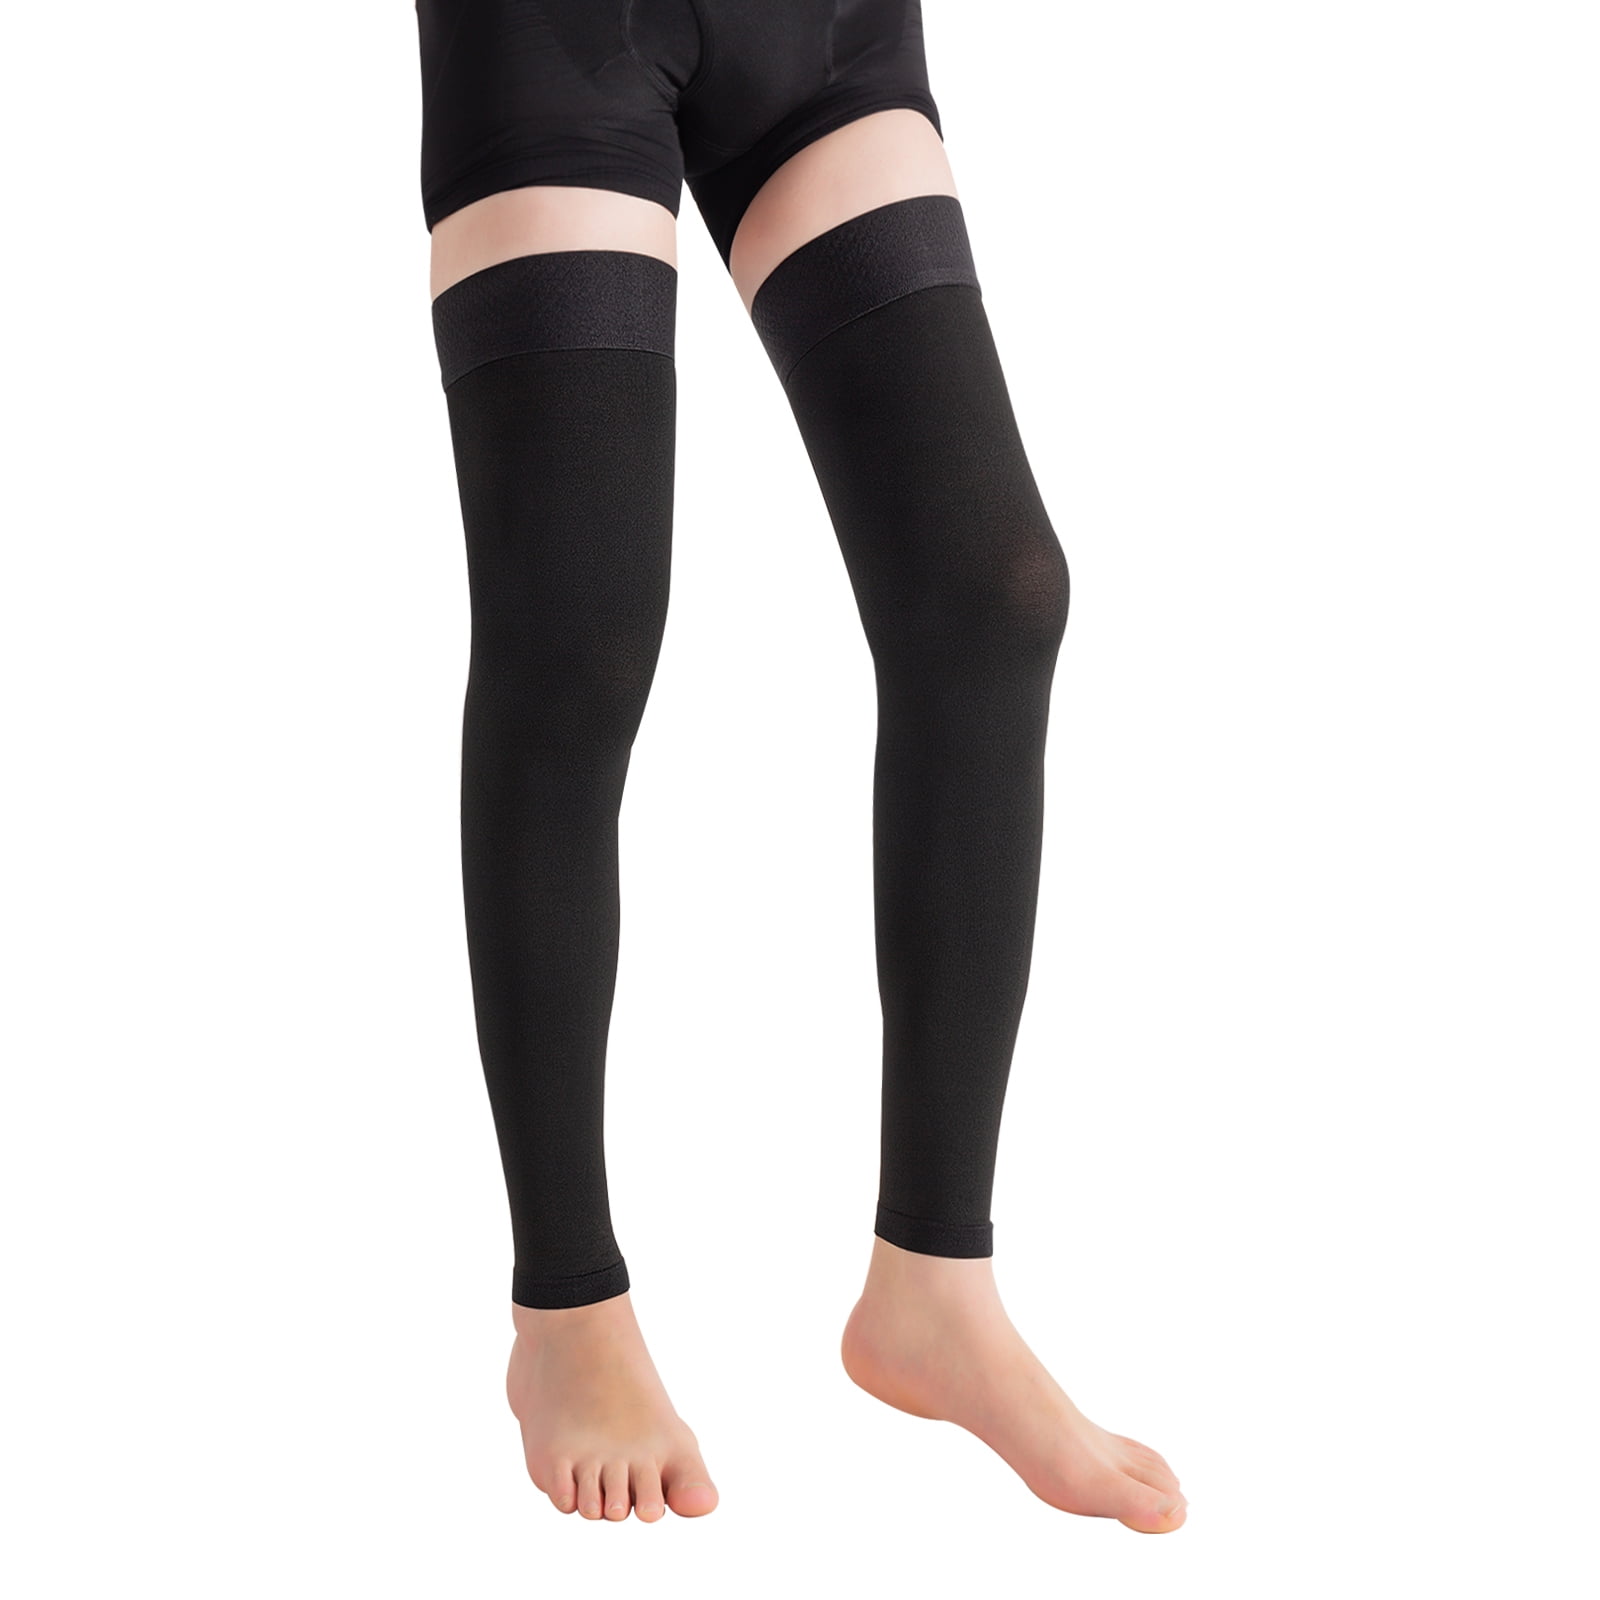 3 Pair Compression Socks for Women Men,Casual Thigh-High Stockings